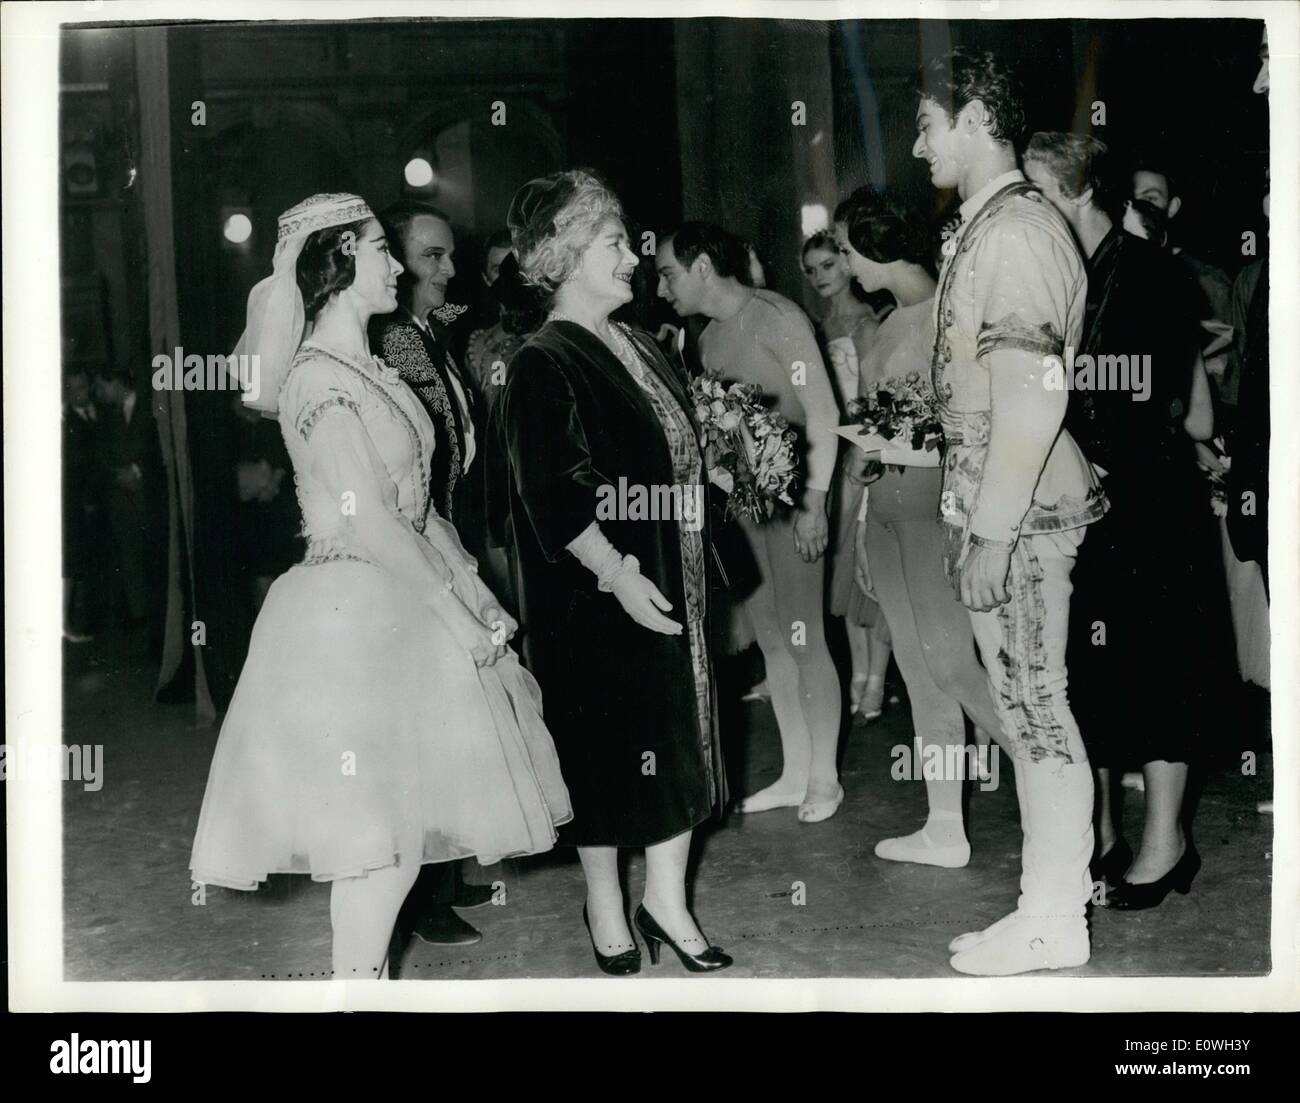 Dec. 12, 1962 - Queen Mother Attends Dancing Gala Matinee... Dame Margot And Her Hungarian Partner: Queen Elizabeth and Queen Mother and Princess Margaret last night attend the Royal Academy of Dancing Gala Matinee -- at the Theater Royal,Drury Lane. Photo Shows Dame Margot Fonteyn presents Viktor Rona Hungarian partner -- to the Queen Mother at the Gala Matinee last night. Stock Photo